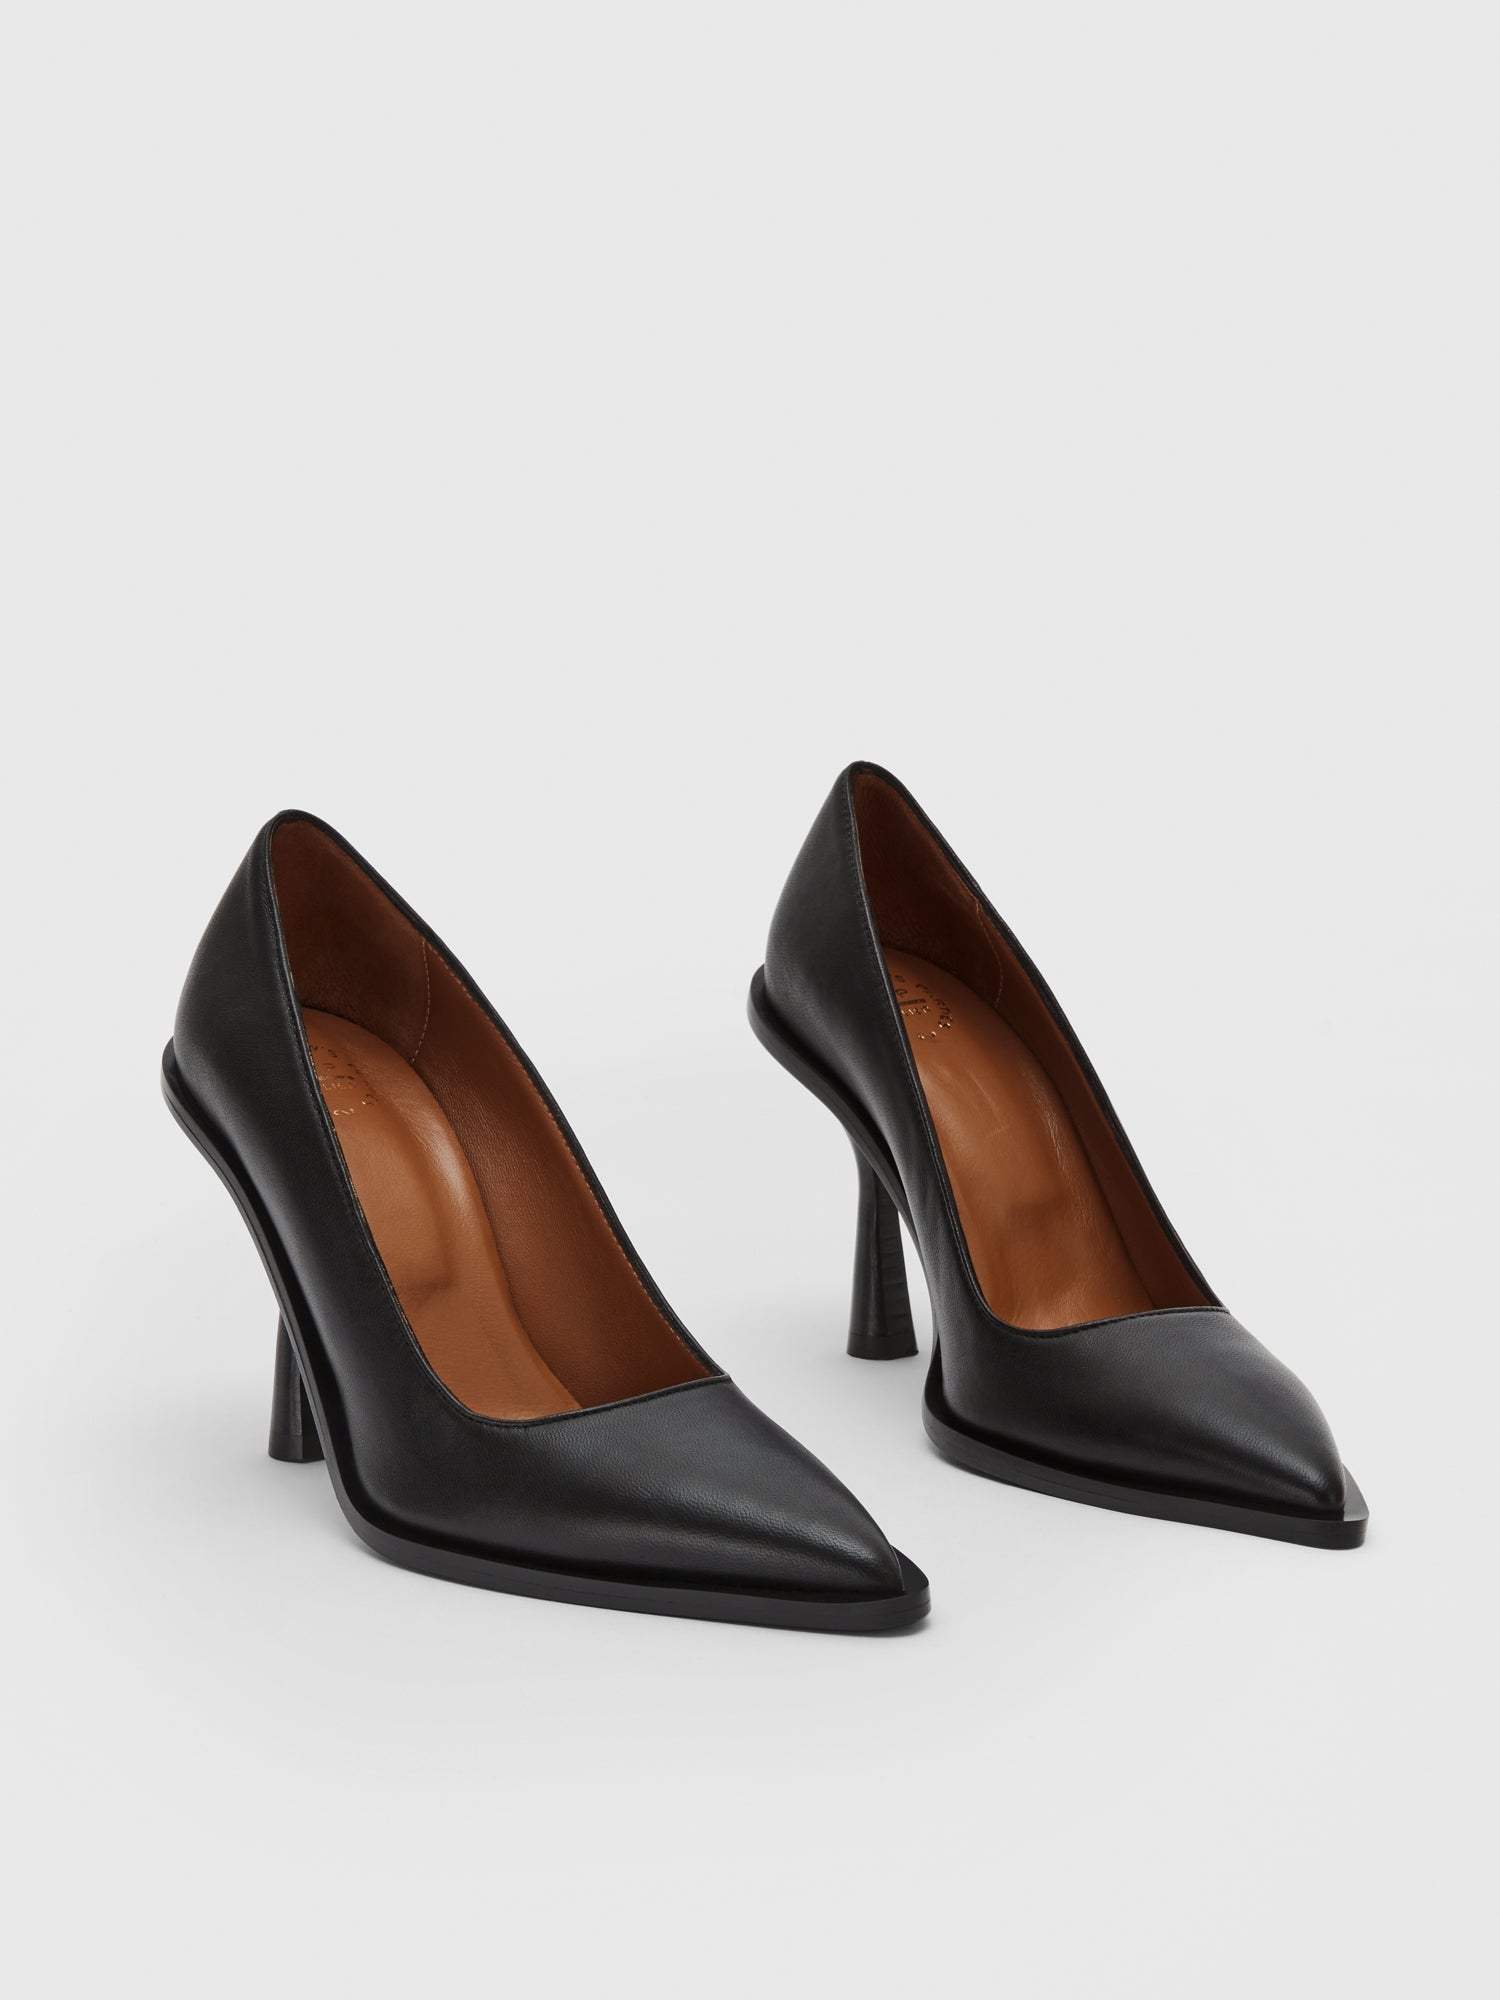 Ferrere pointed-toe leather pumps, black